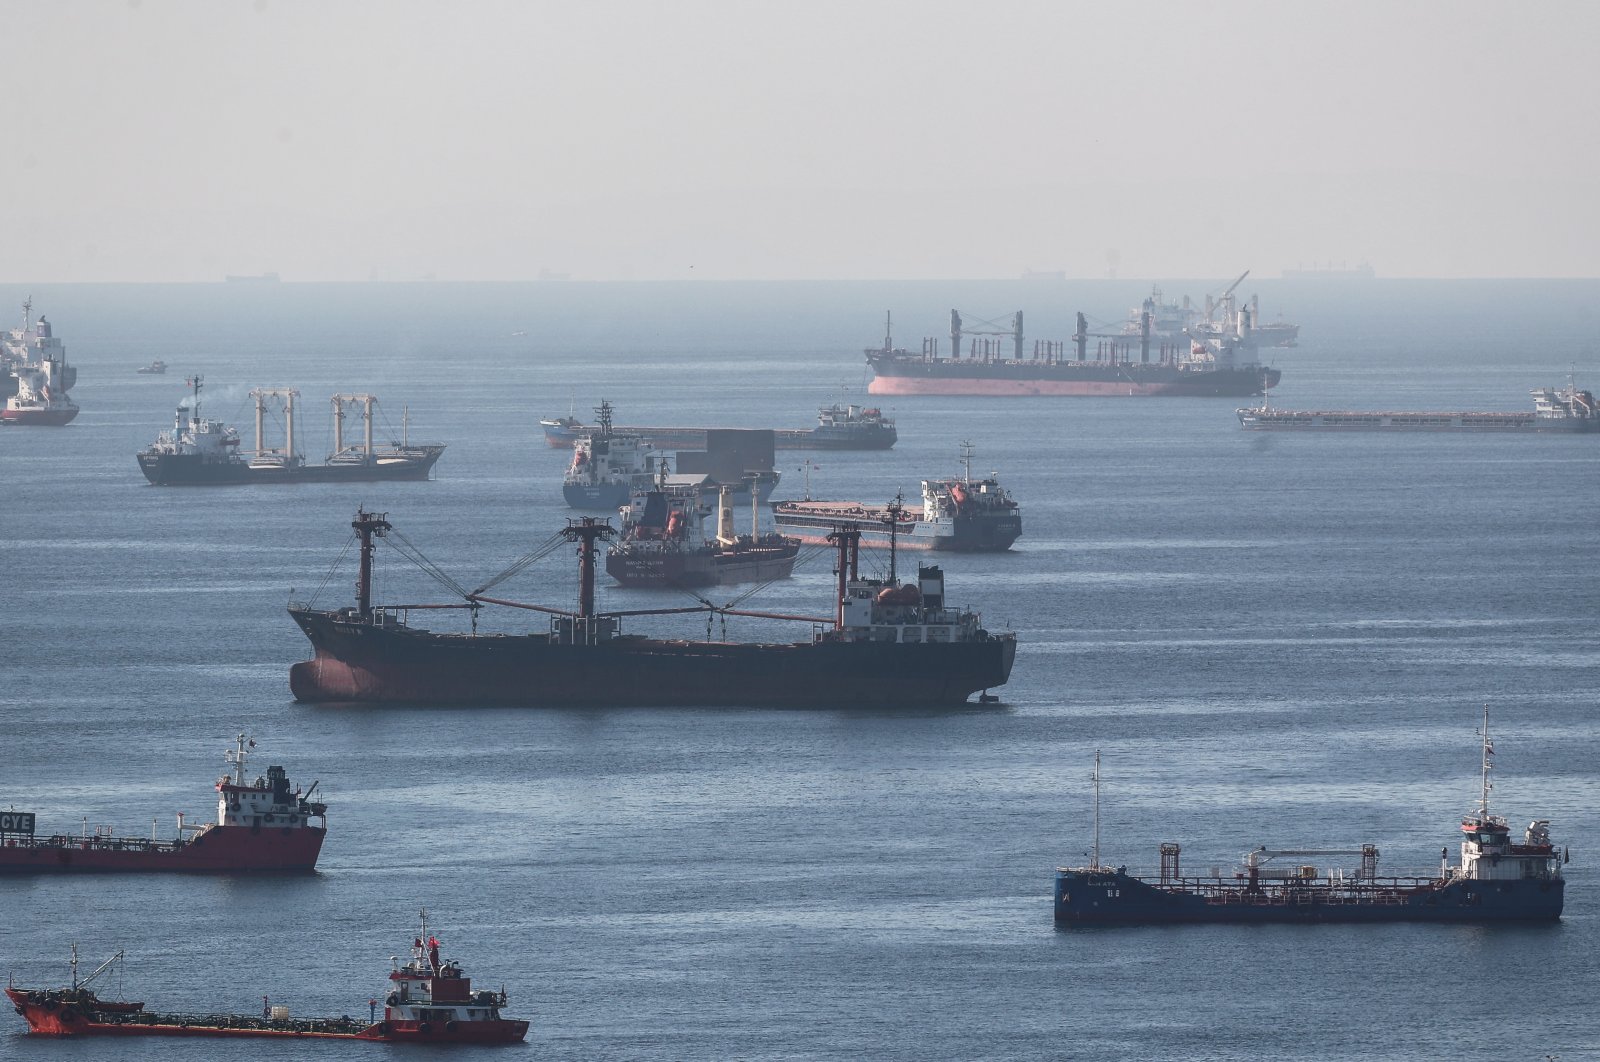 Cargo ships carrying Ukraine grain are anchored as they wait in line for the inspection on the Marmara sea, Istanbul, Türkiye, Oct. 22, 2022. (EPA Photo)